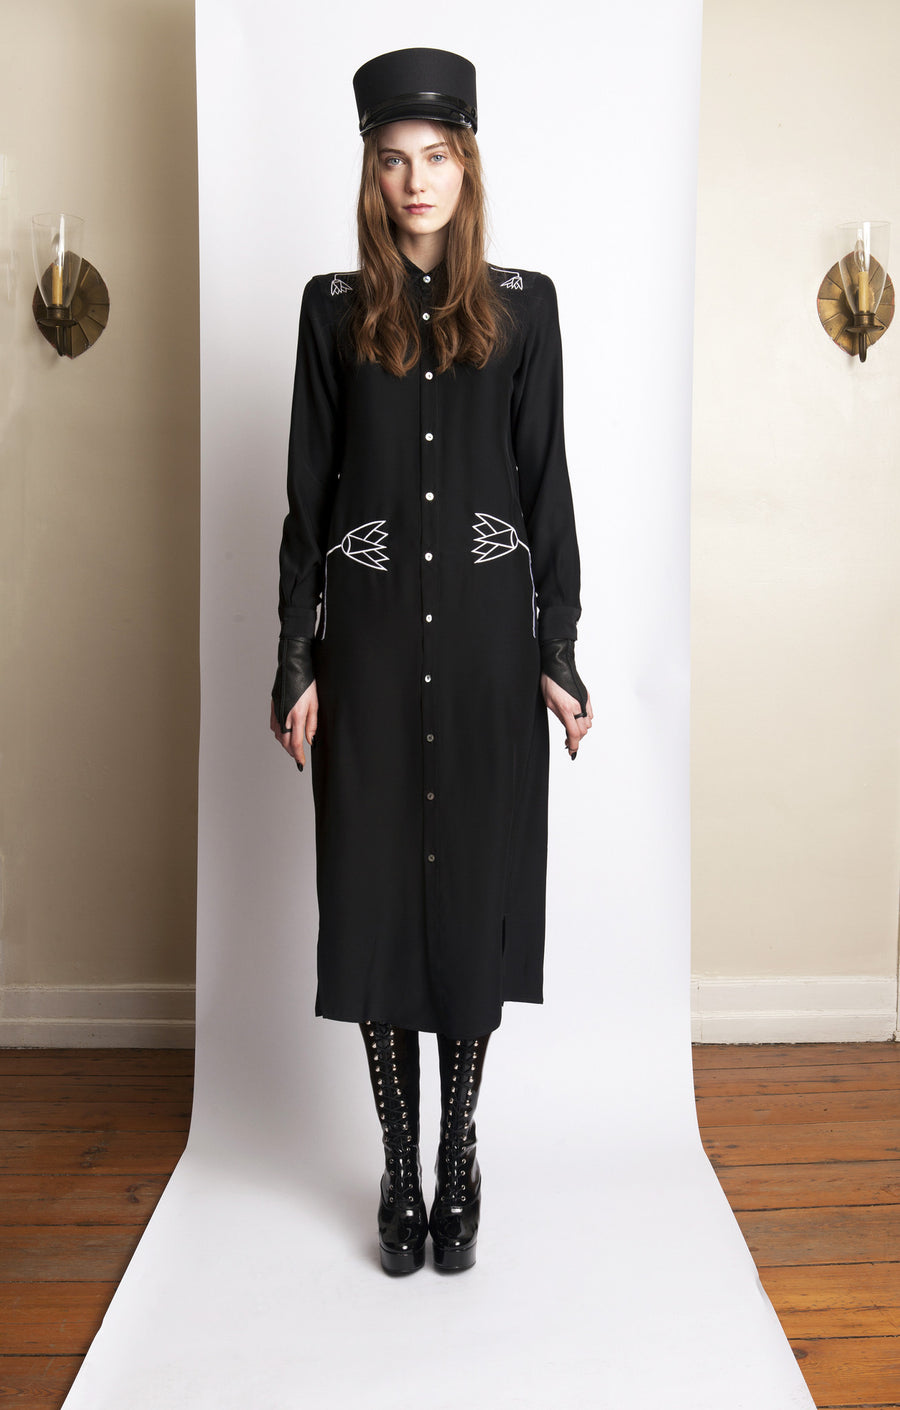 Basia IMG Model Wendy Nicol Clothing Fashion Designer Ready to Wear Fashion Runway Show AW13 Witch Lessons Embroidered Egyptian Lotus button up long sleeve silk charmeuse Blouse Dress Black Handmade in NYC New york city Custom Tailoring Fitting Size Fabric Color Made to Measure